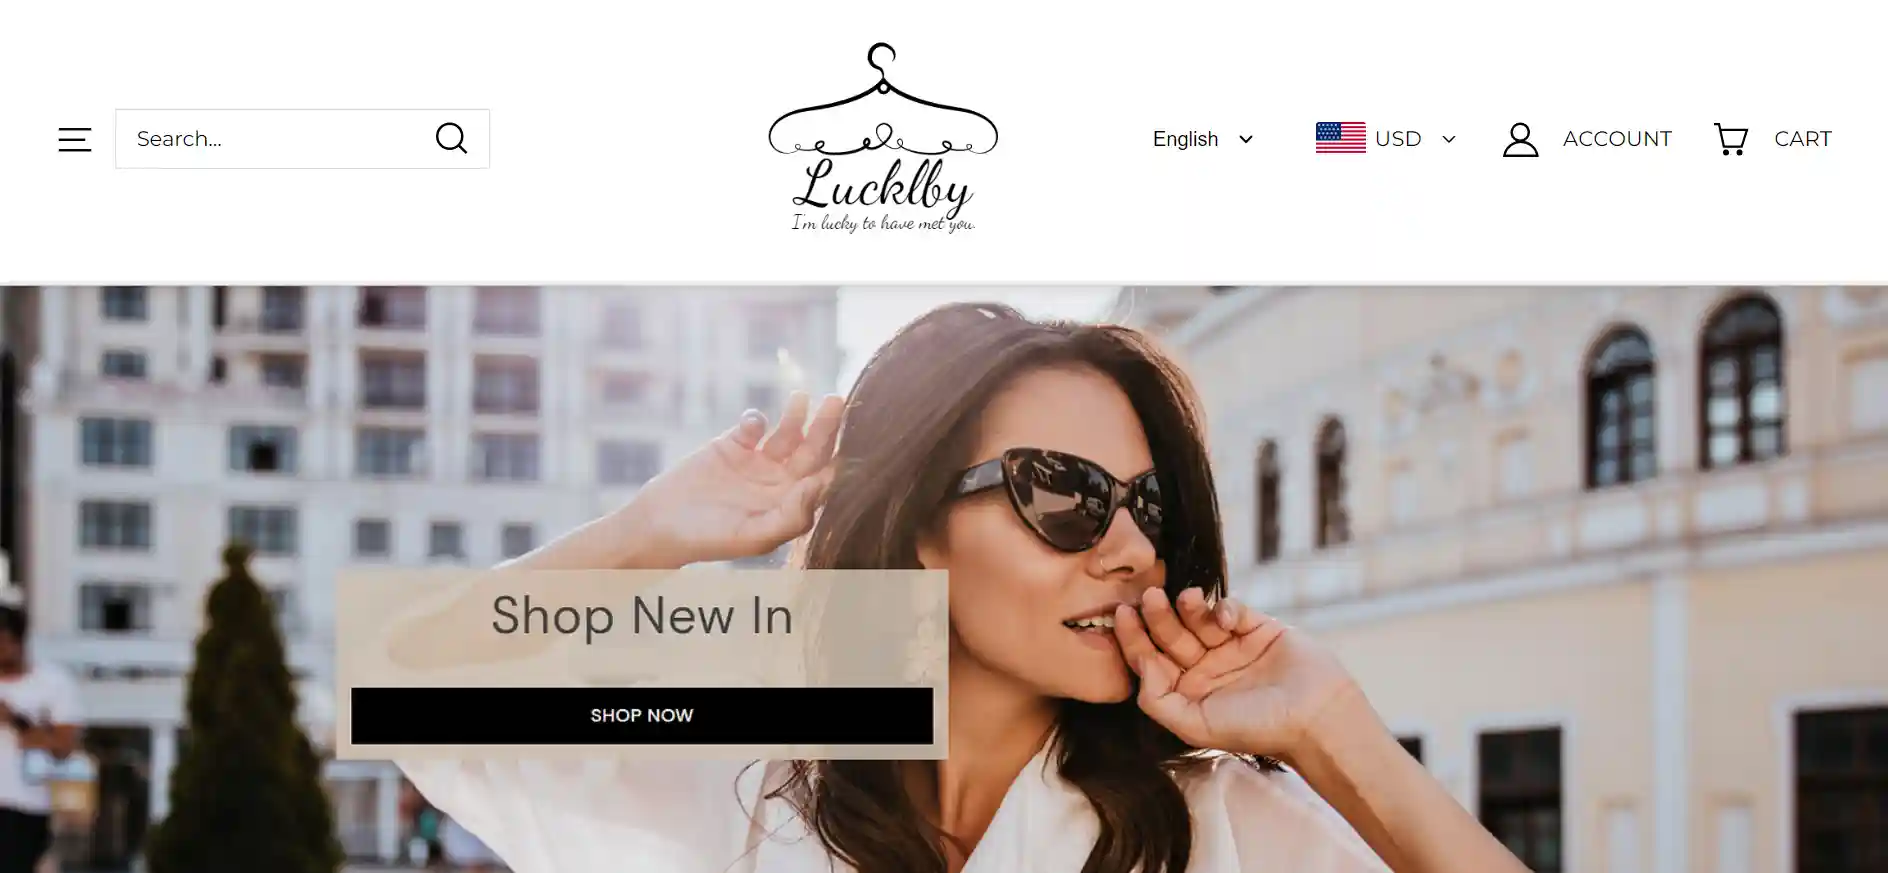 You are currently viewing Lucklby Clothing Reviews: Scam or Worth the Try?